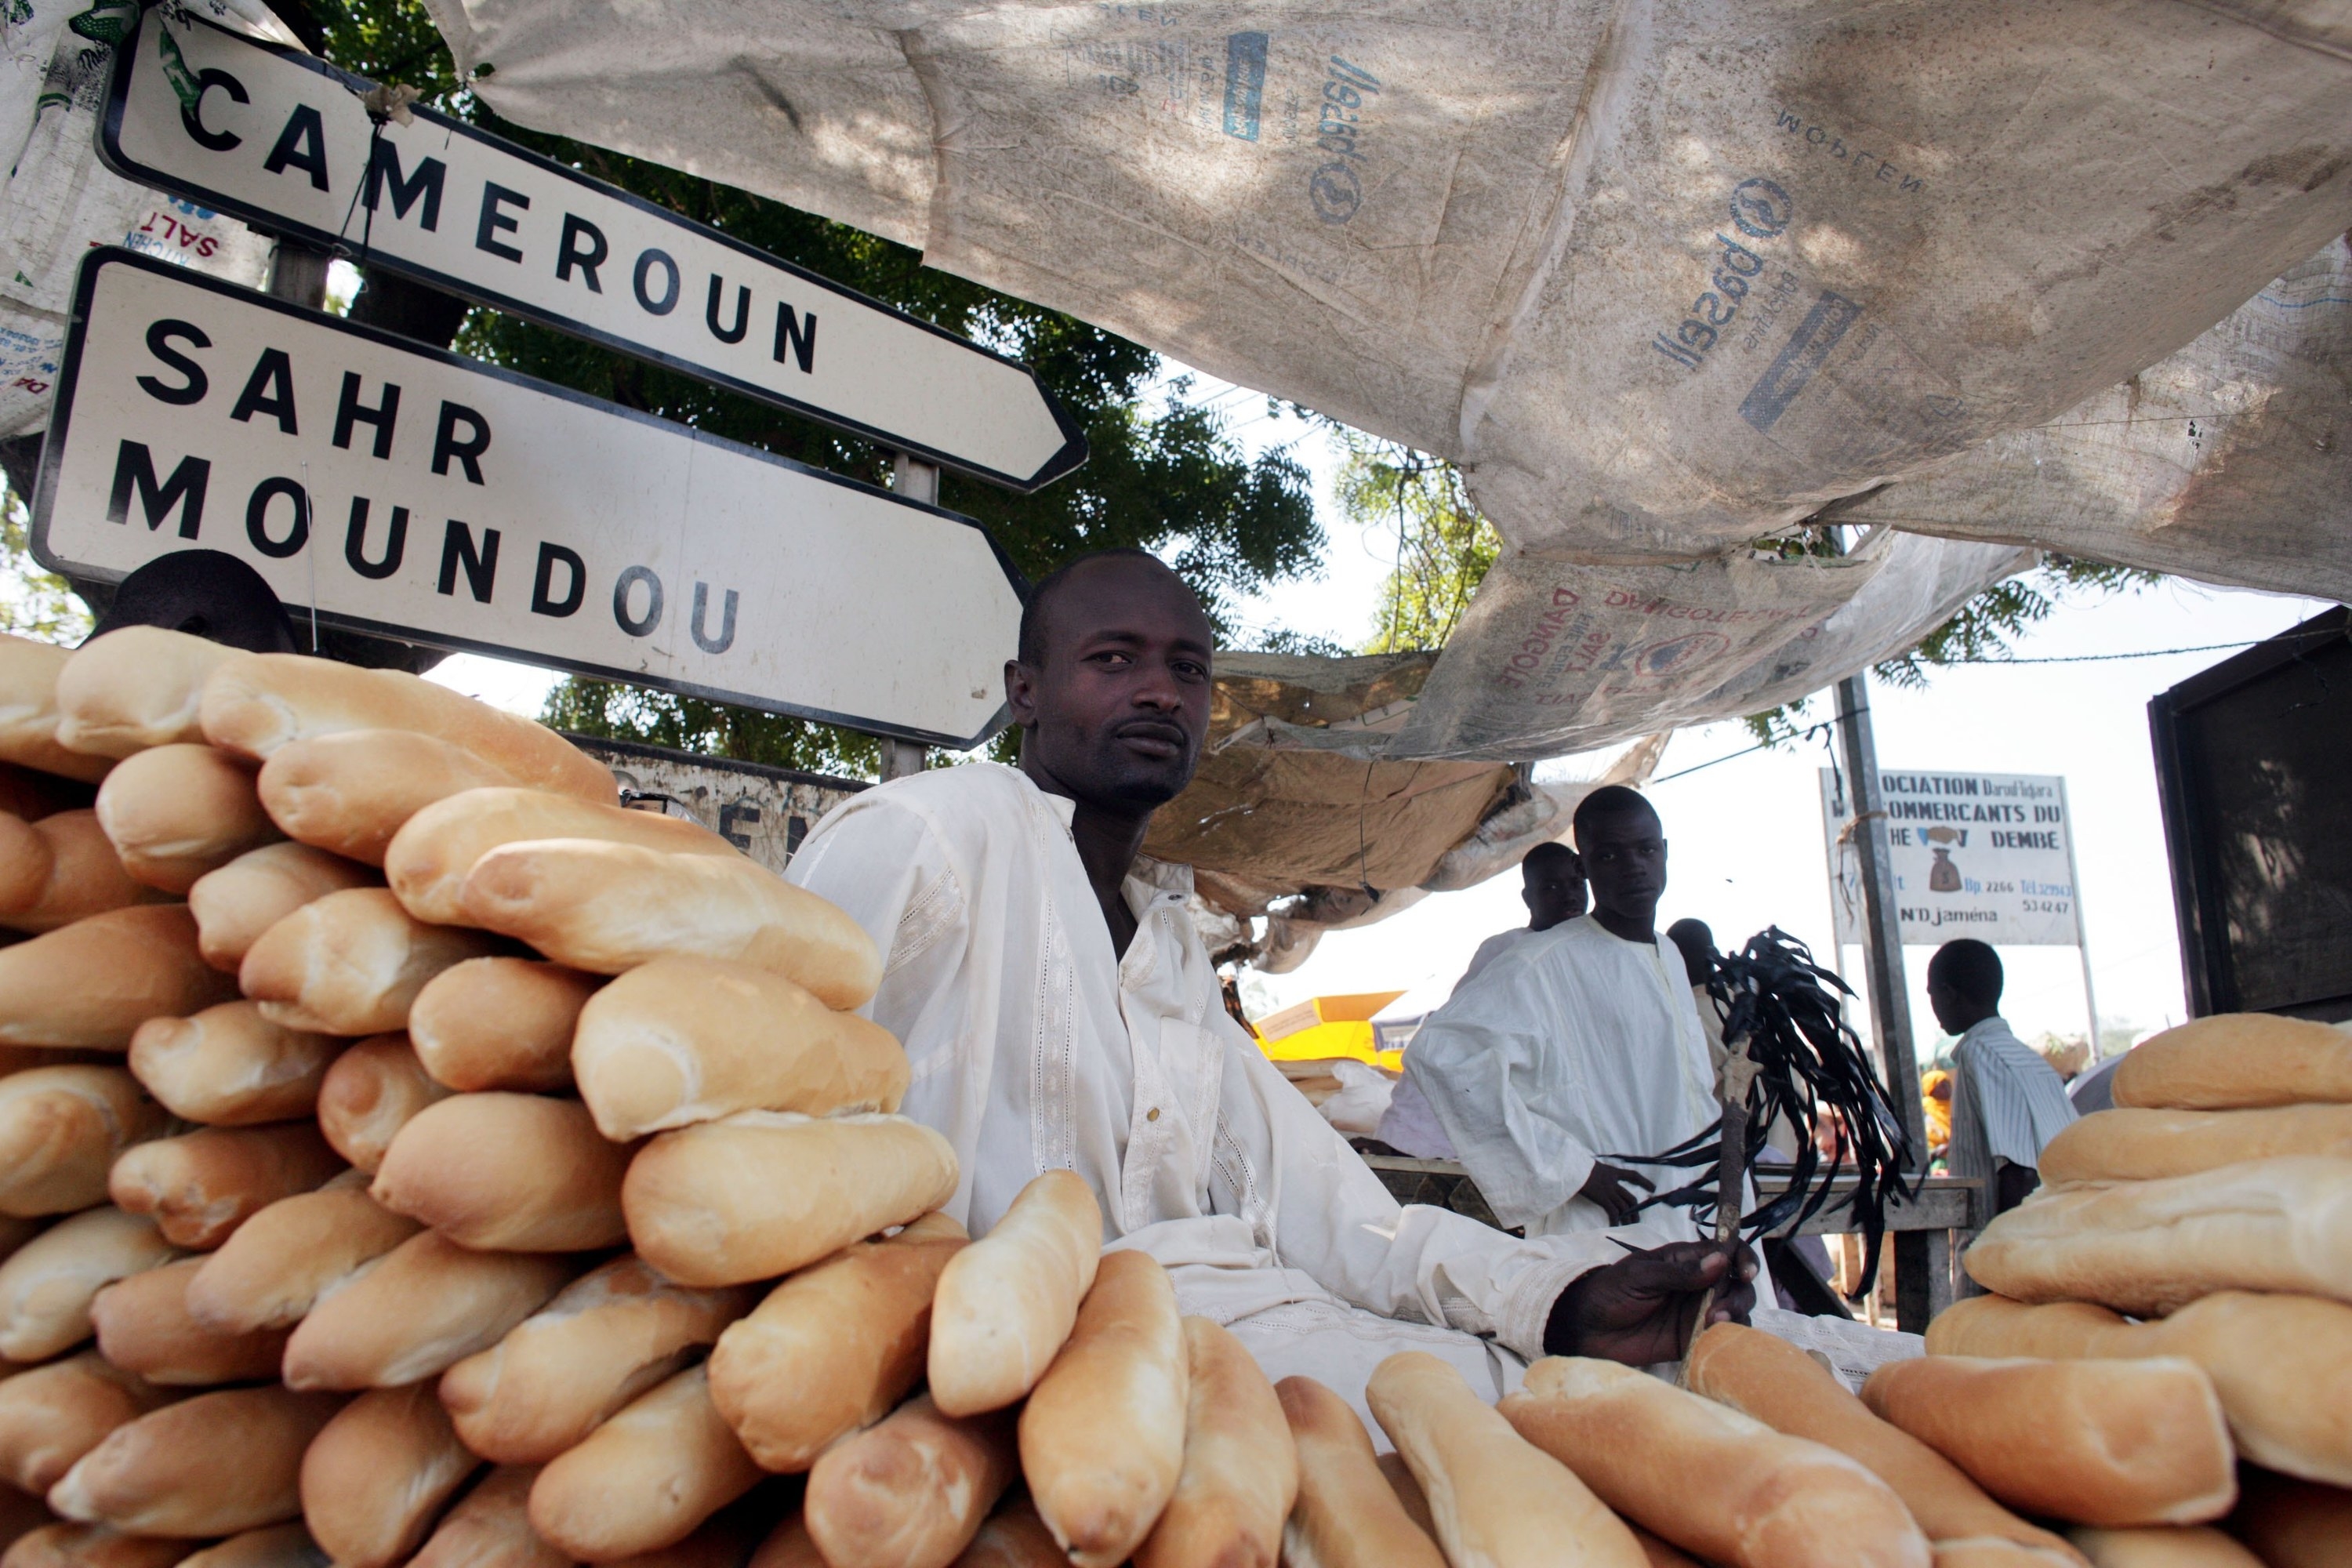 A bread stall and the vendor at an open-air market